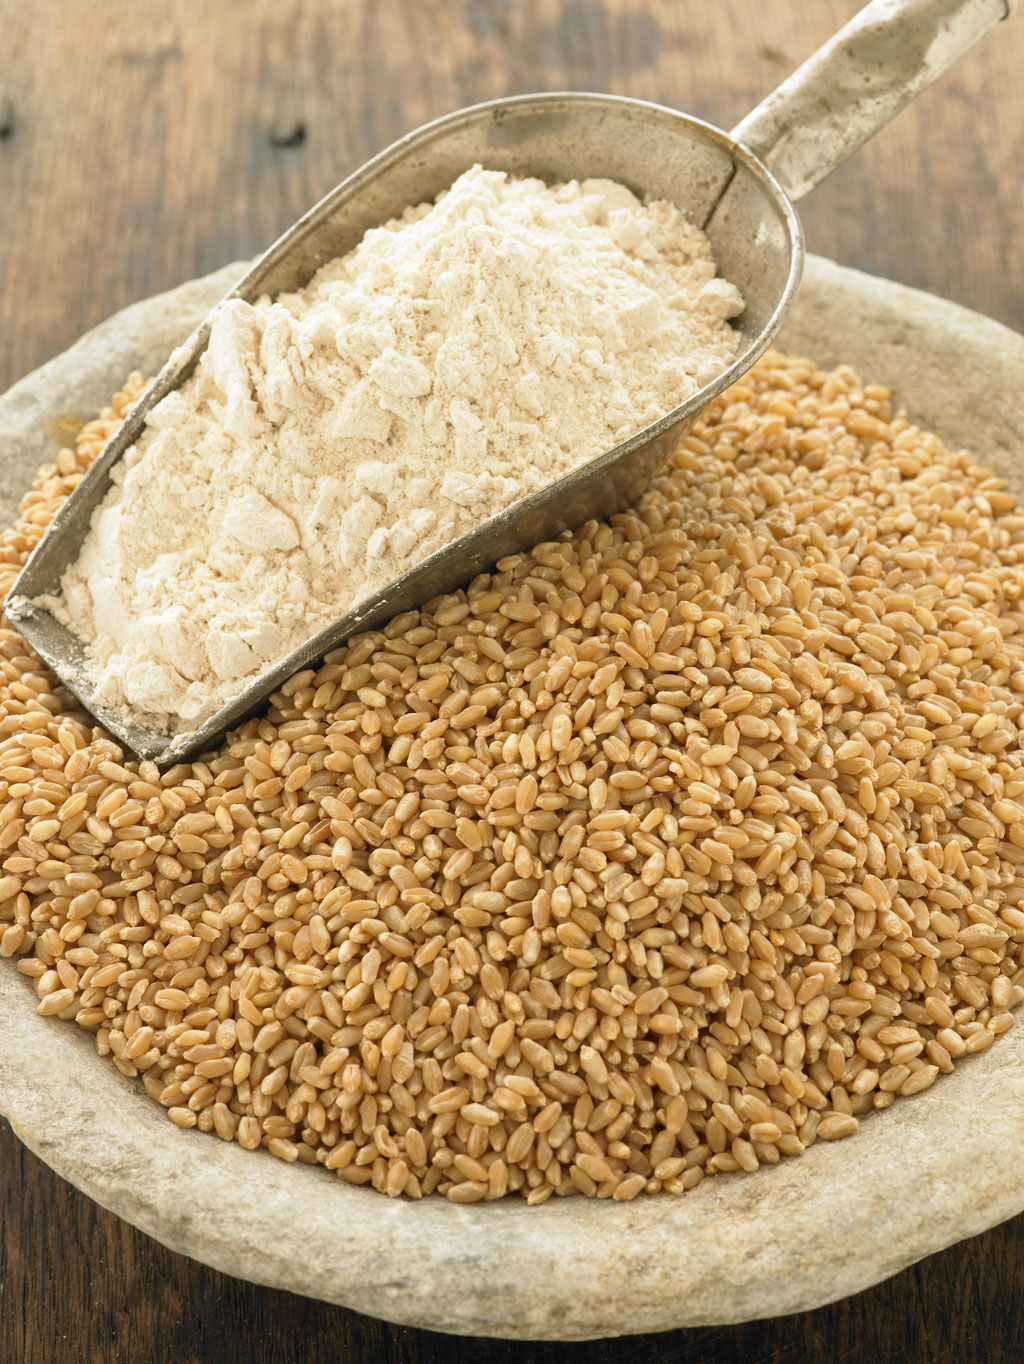 HIGHT QUALITY NUTRITION GRAIN PRICE PRODUCTS WHOLE SOFT MILLING WHEAT